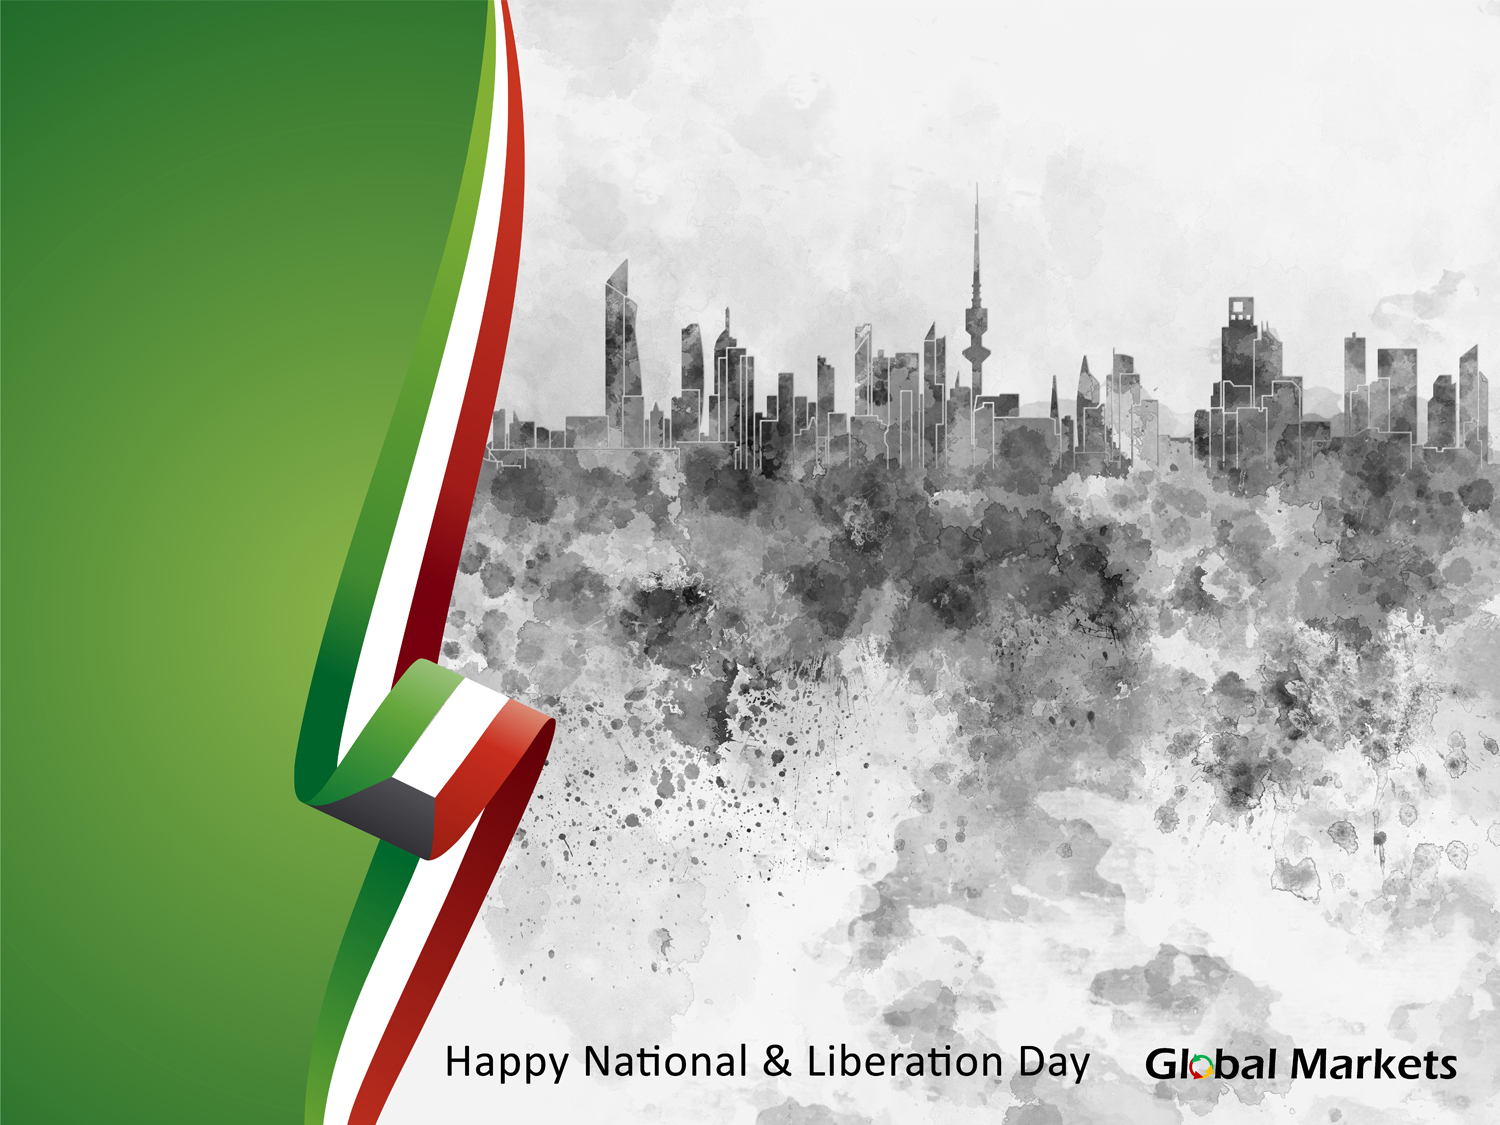 Happy National & Liberation Day